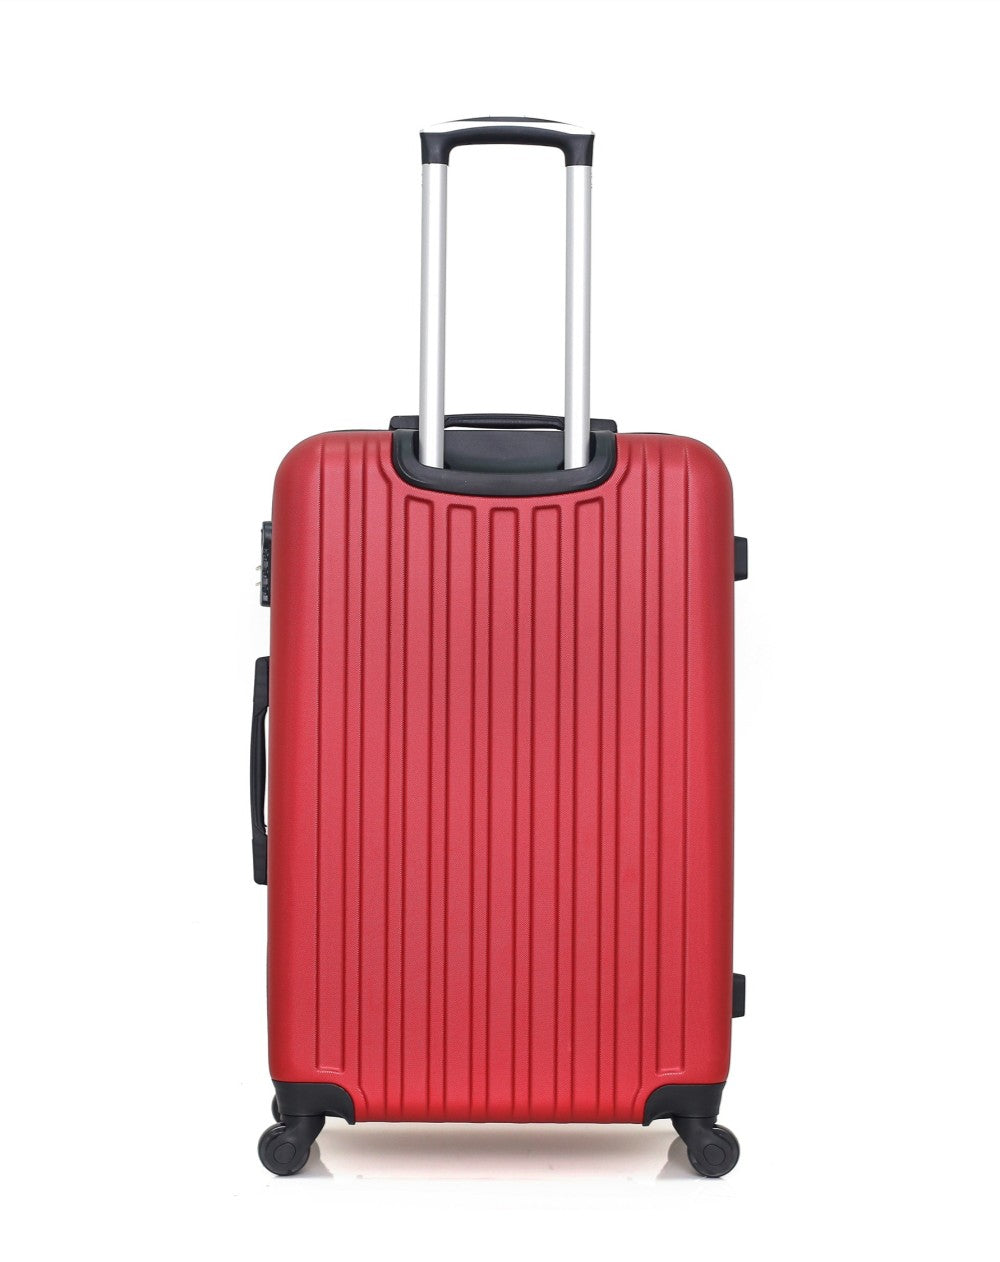 Valise Grand Format ABS SPRINGFIELD-A 4 Roues 70 cm